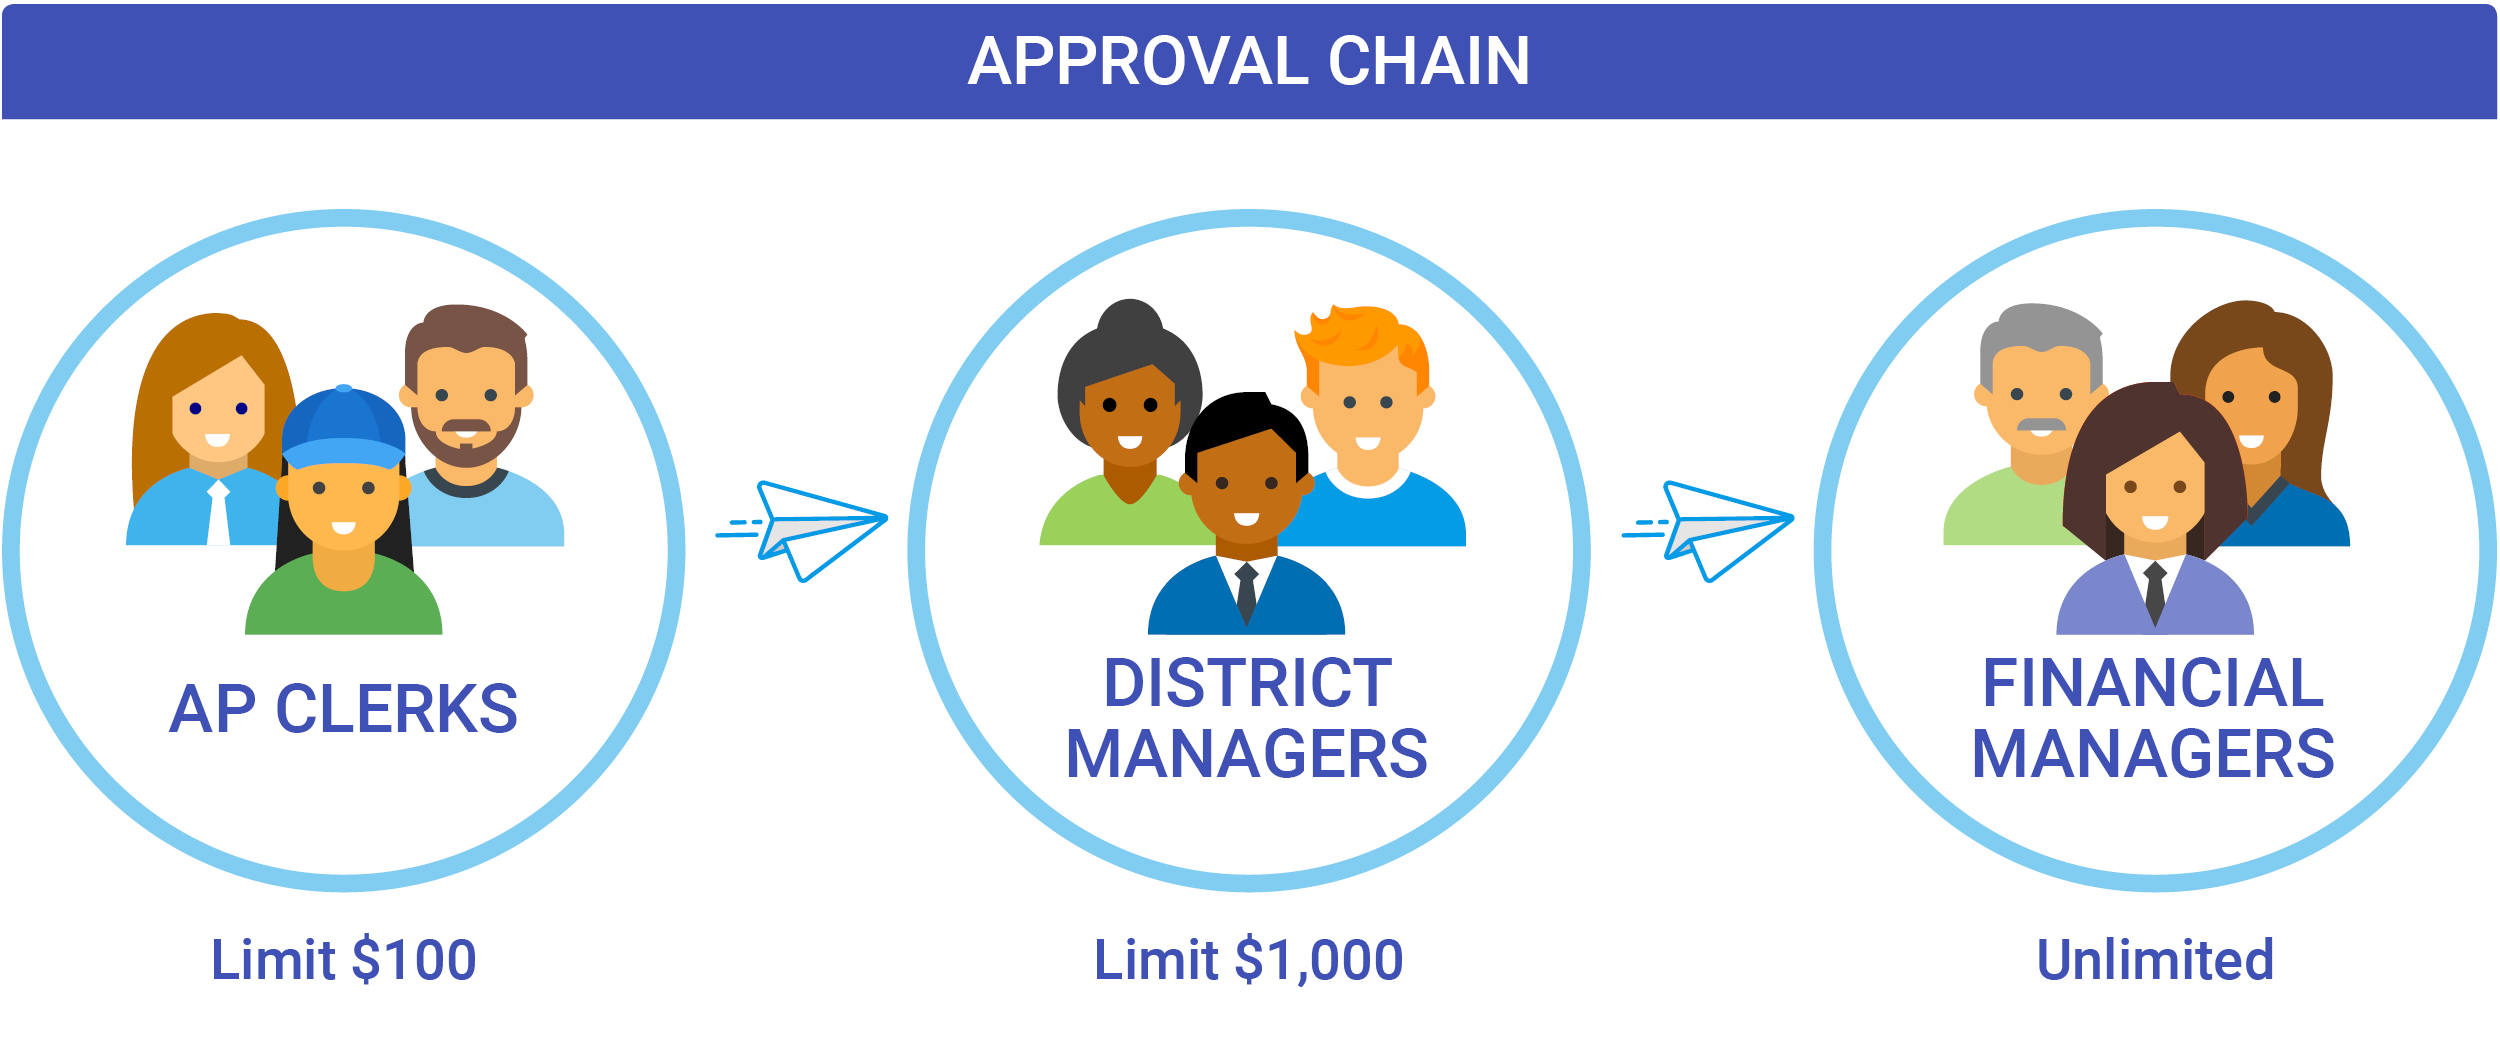 Approval Chain